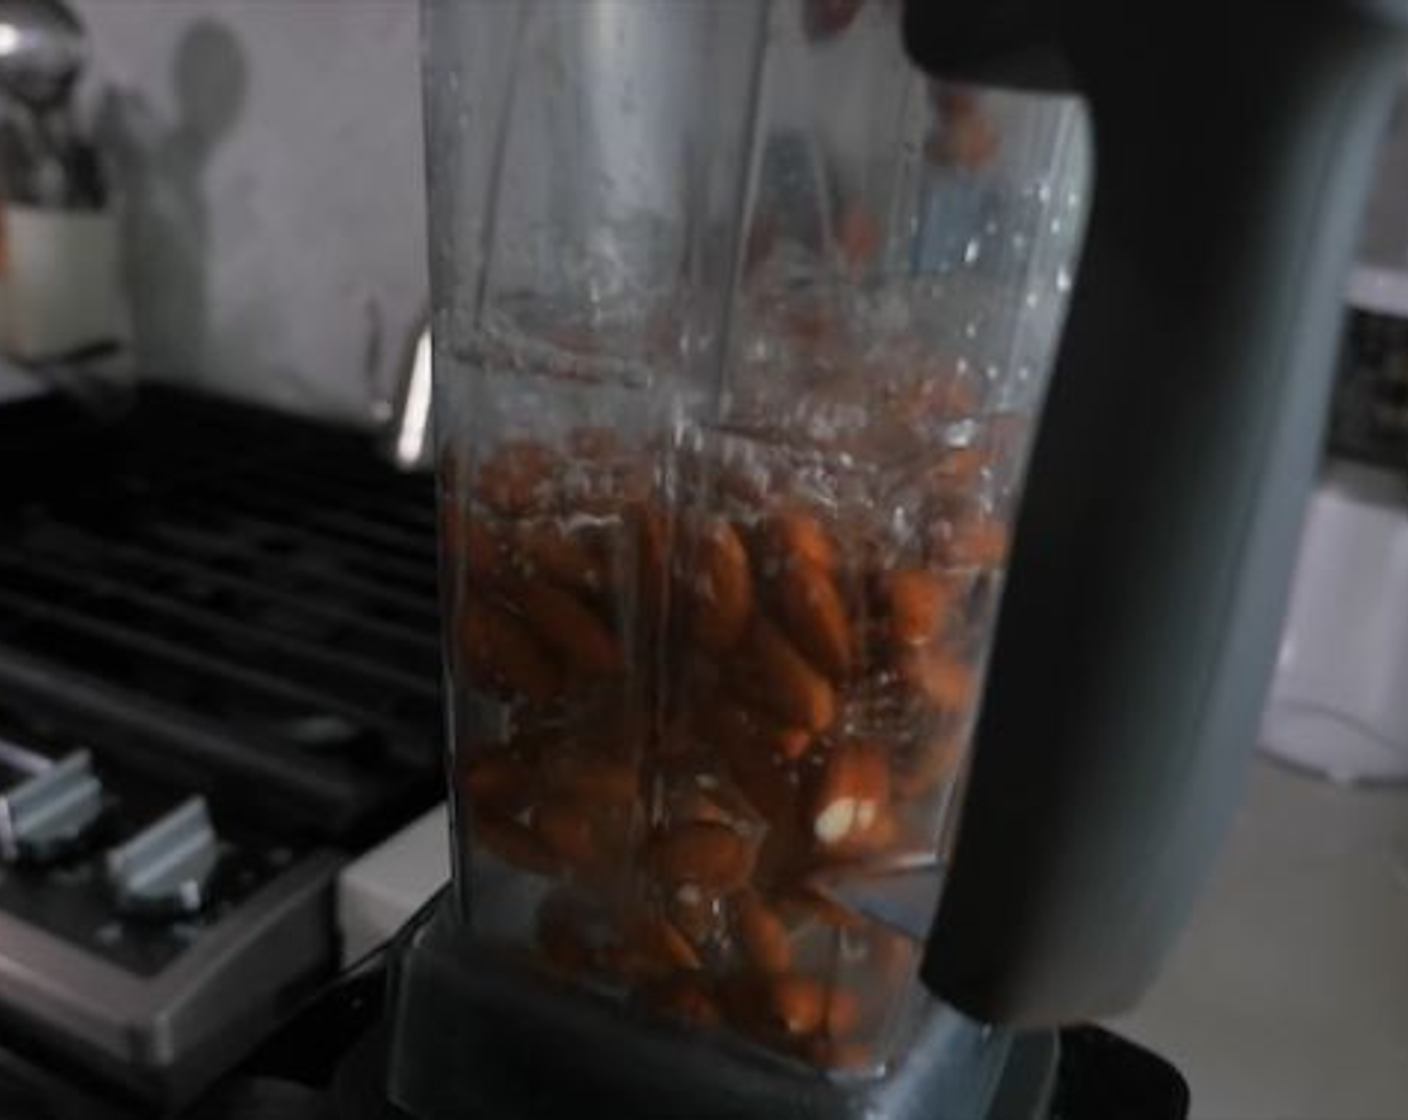 step 1 Add Raw Almonds (1 cup), Water (5 cups) and Salt (1 pinch) to a high-speed blender. If you just want Unsweetened Almond Milk, blend on high for 30 seconds until creamy, then skip to final step.